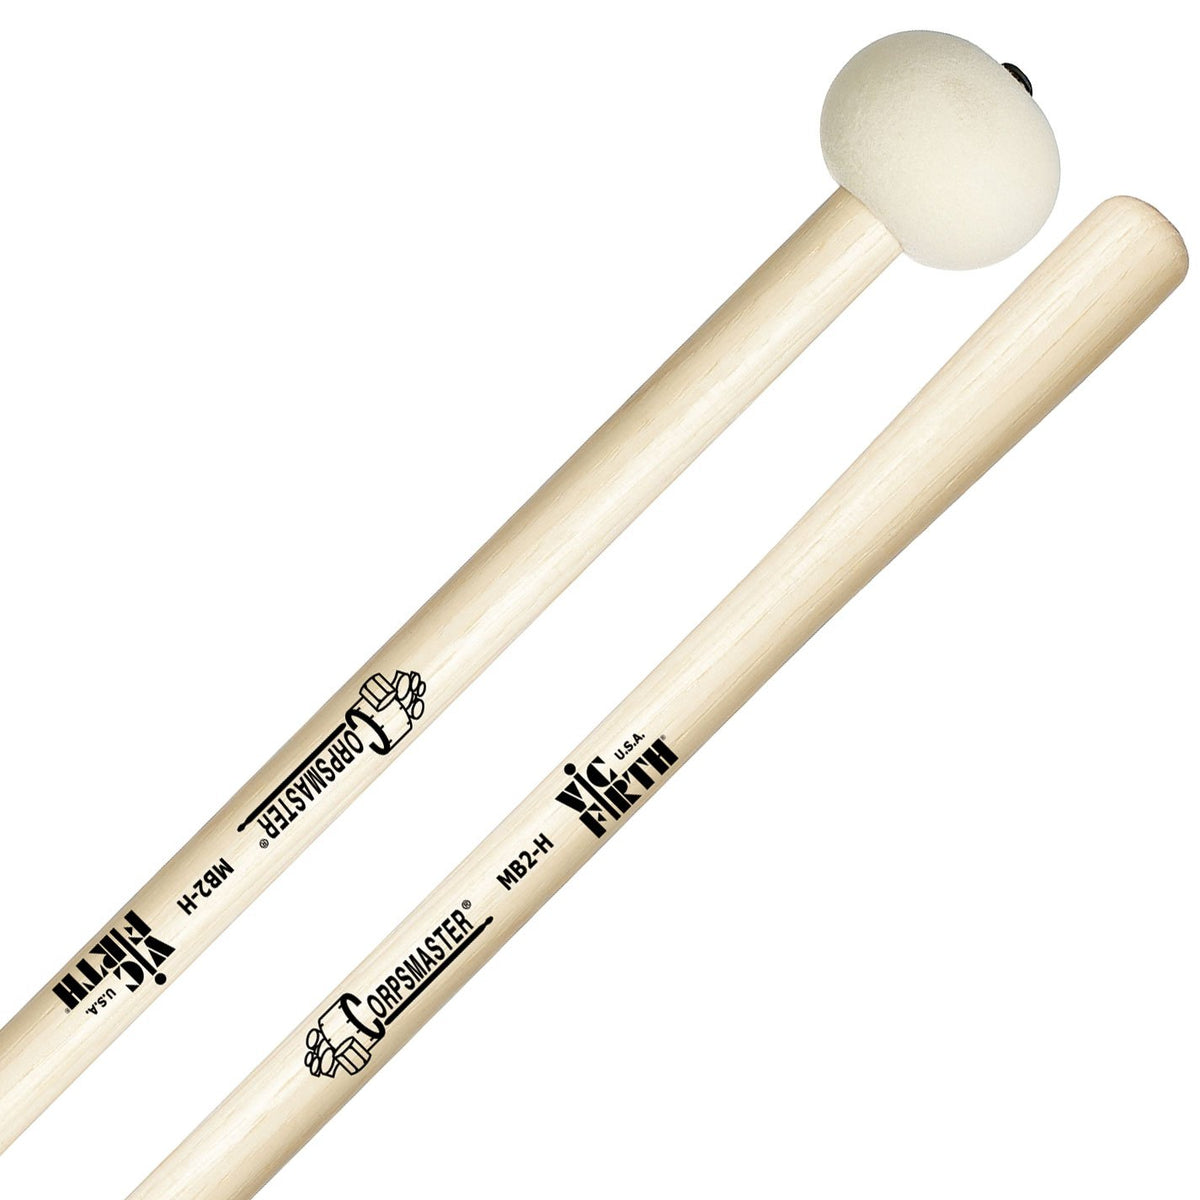 Vic Firth - Corpsmaster Bass Drum Mallets-Percussion-Vic Firth-MB2H: Medium Head - Hard-Music Elements